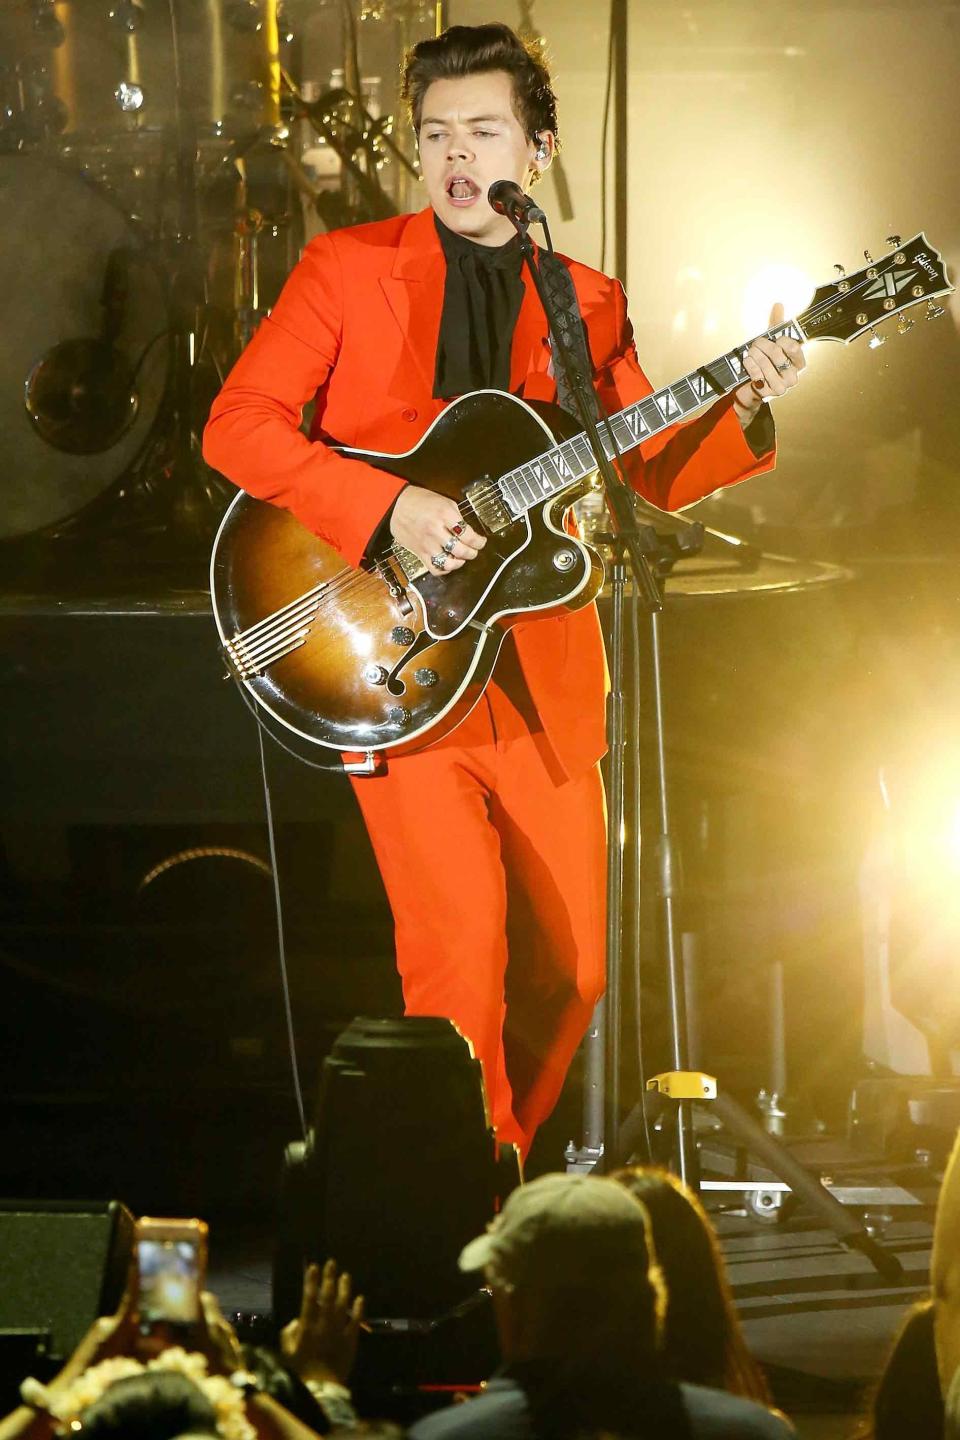 Performing onstage during the 5th Annual "We Can Survive" concert at the Hollywood Bowl in Los Angeles.